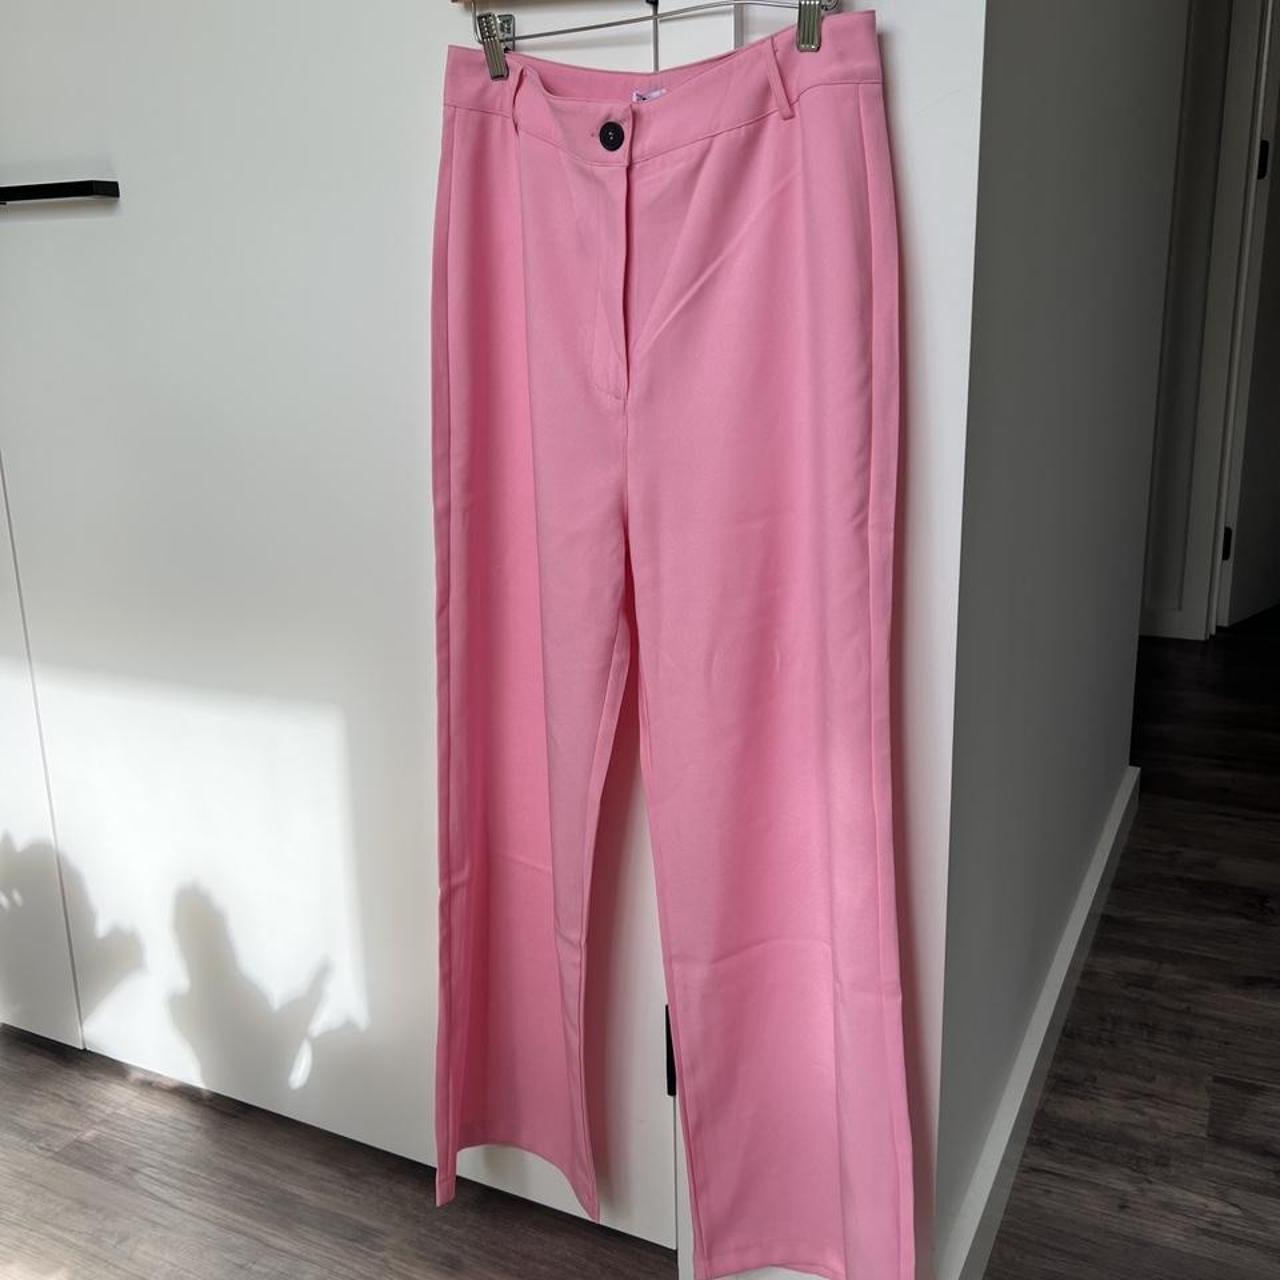 Peppermayo pink wide leg pants 🤍 brand new with... - Depop